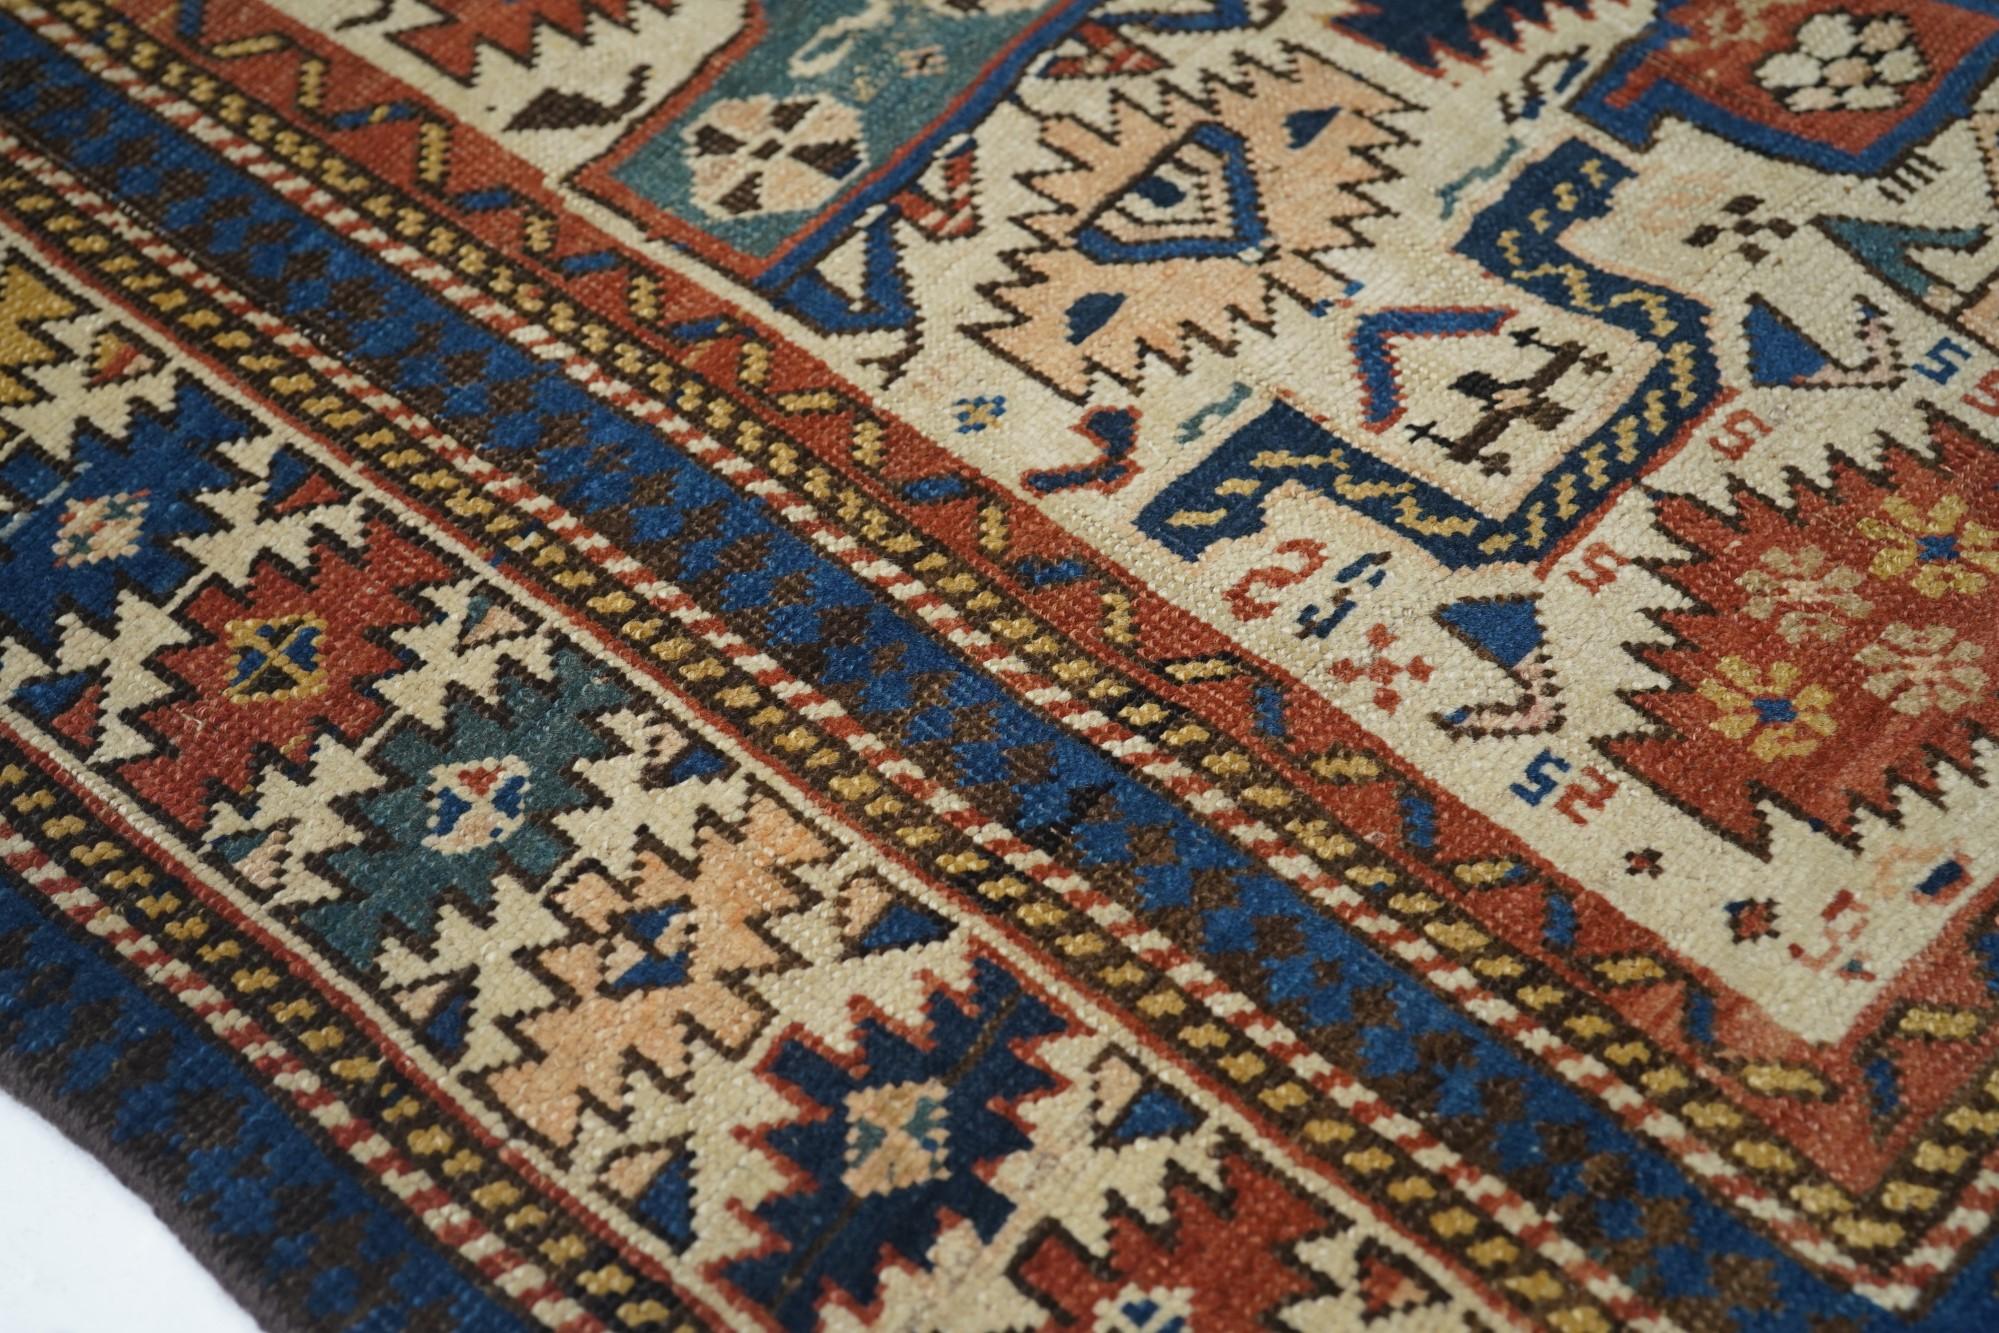 Early 20th Century Antique Zeikor Rug 4'0